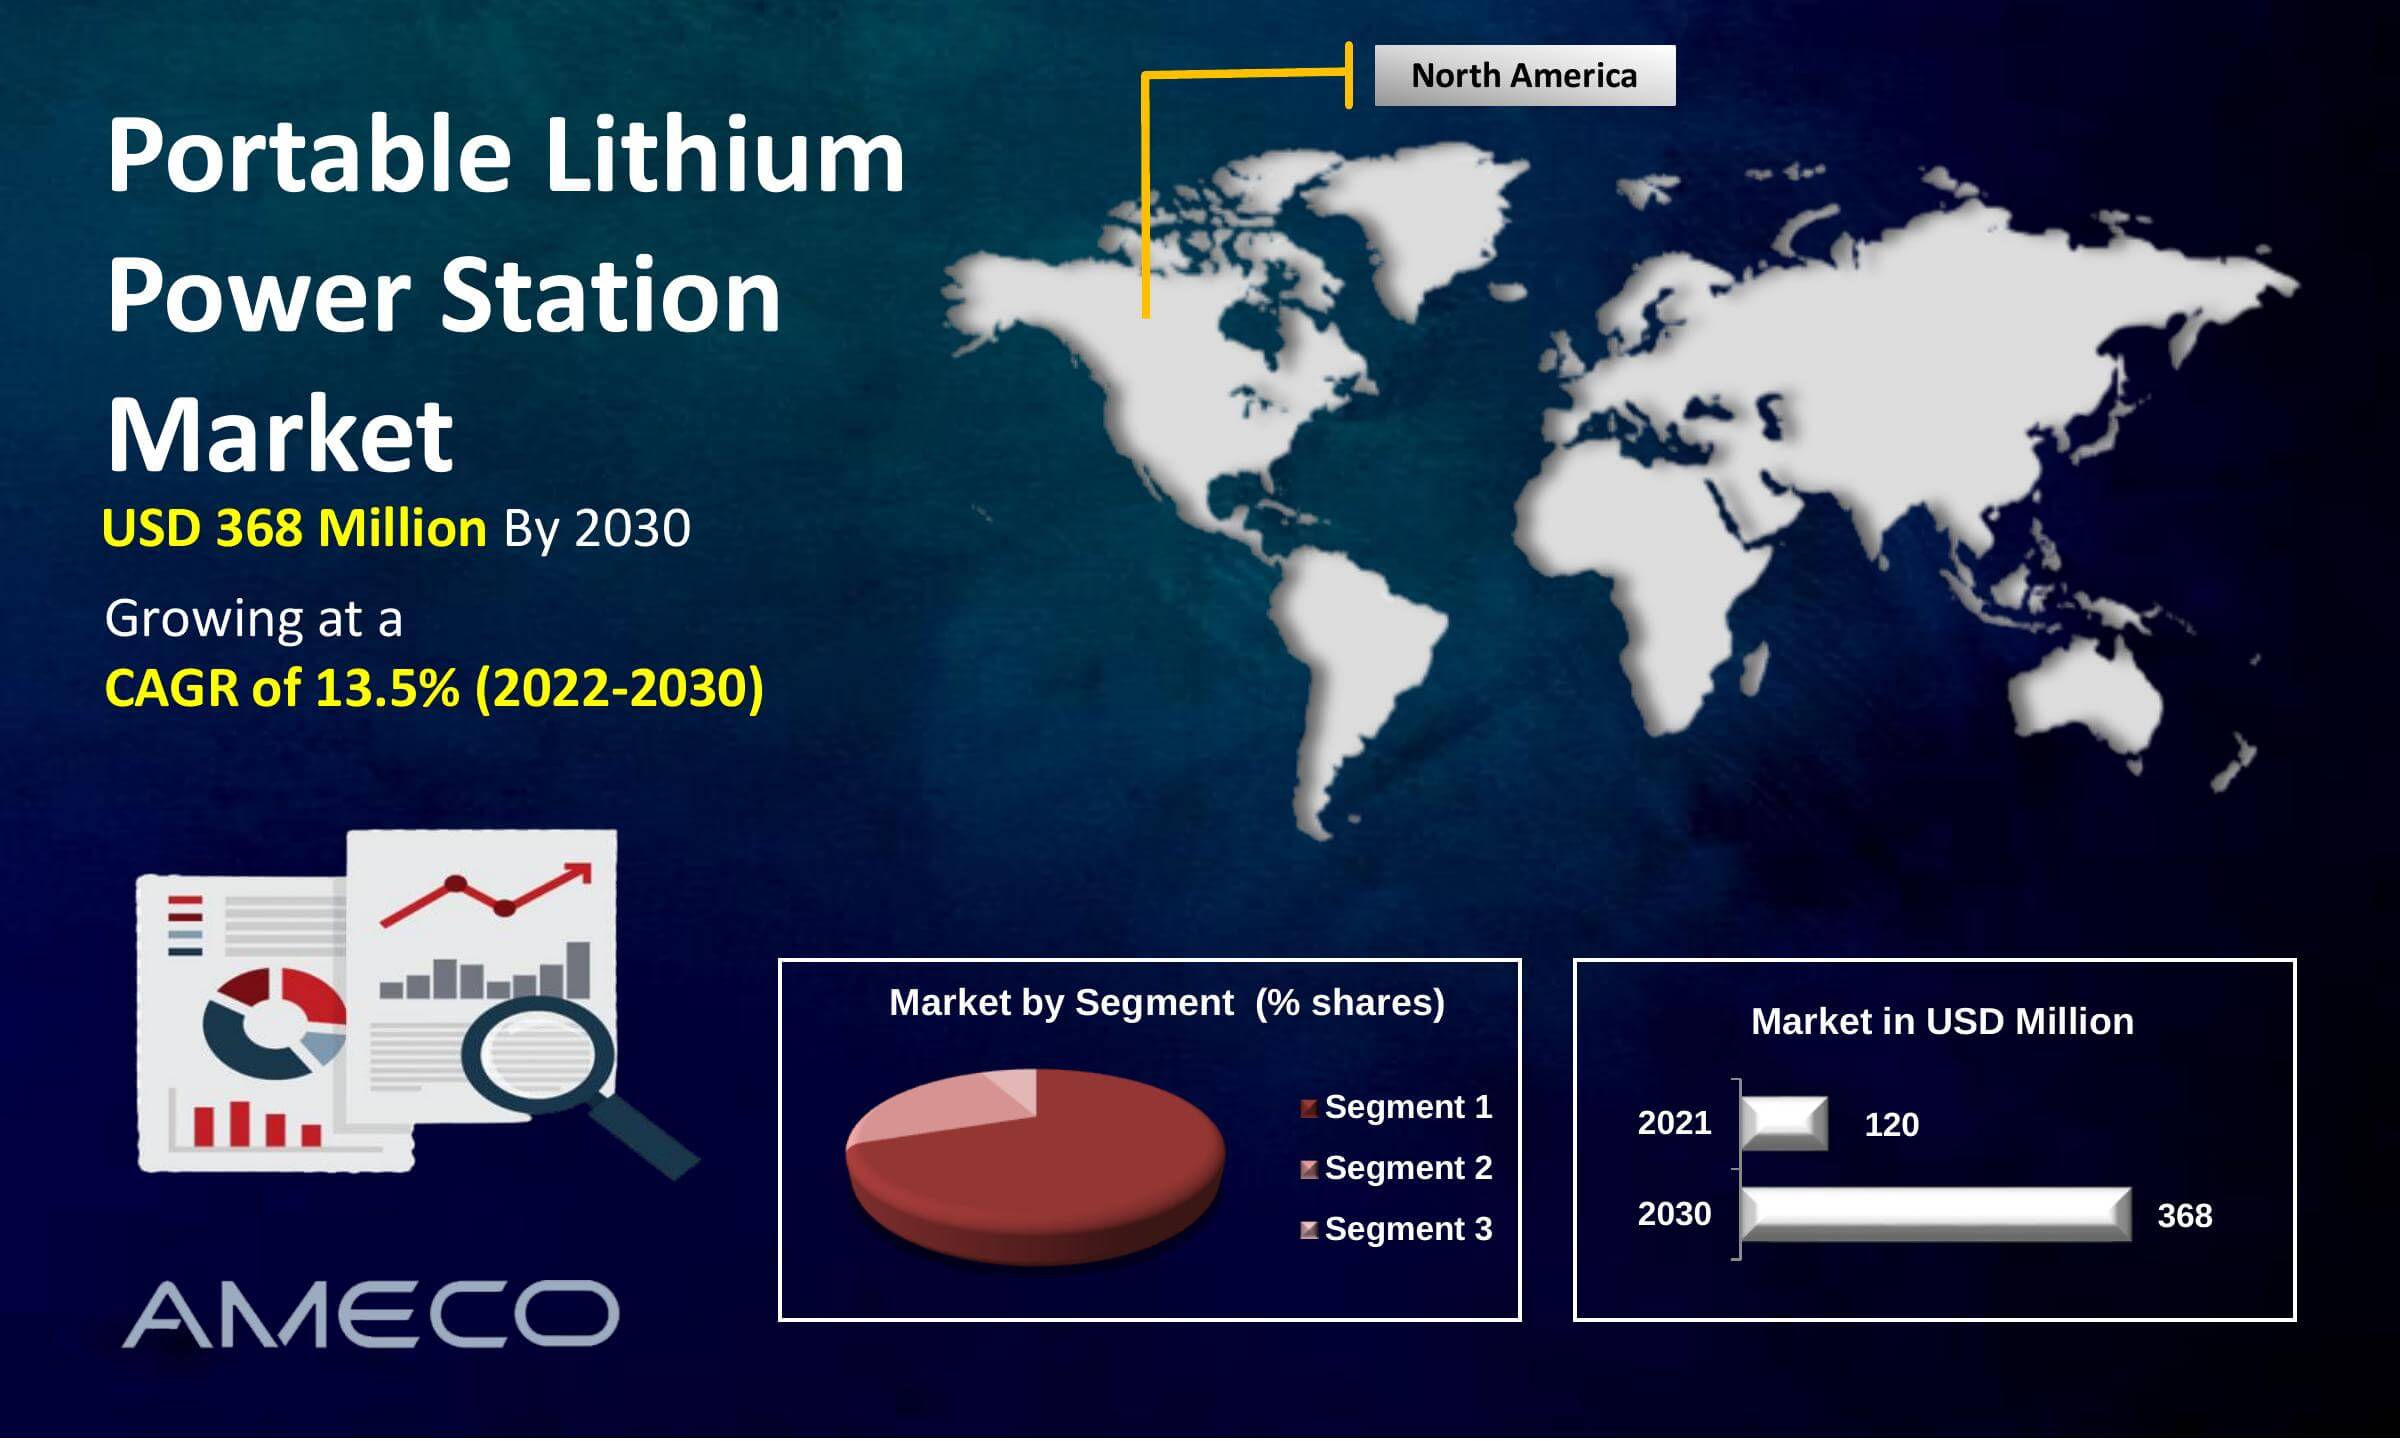 Portable Lithium Power Station Market Size, Share, Growth, Trends, and Forecast 2022-2030